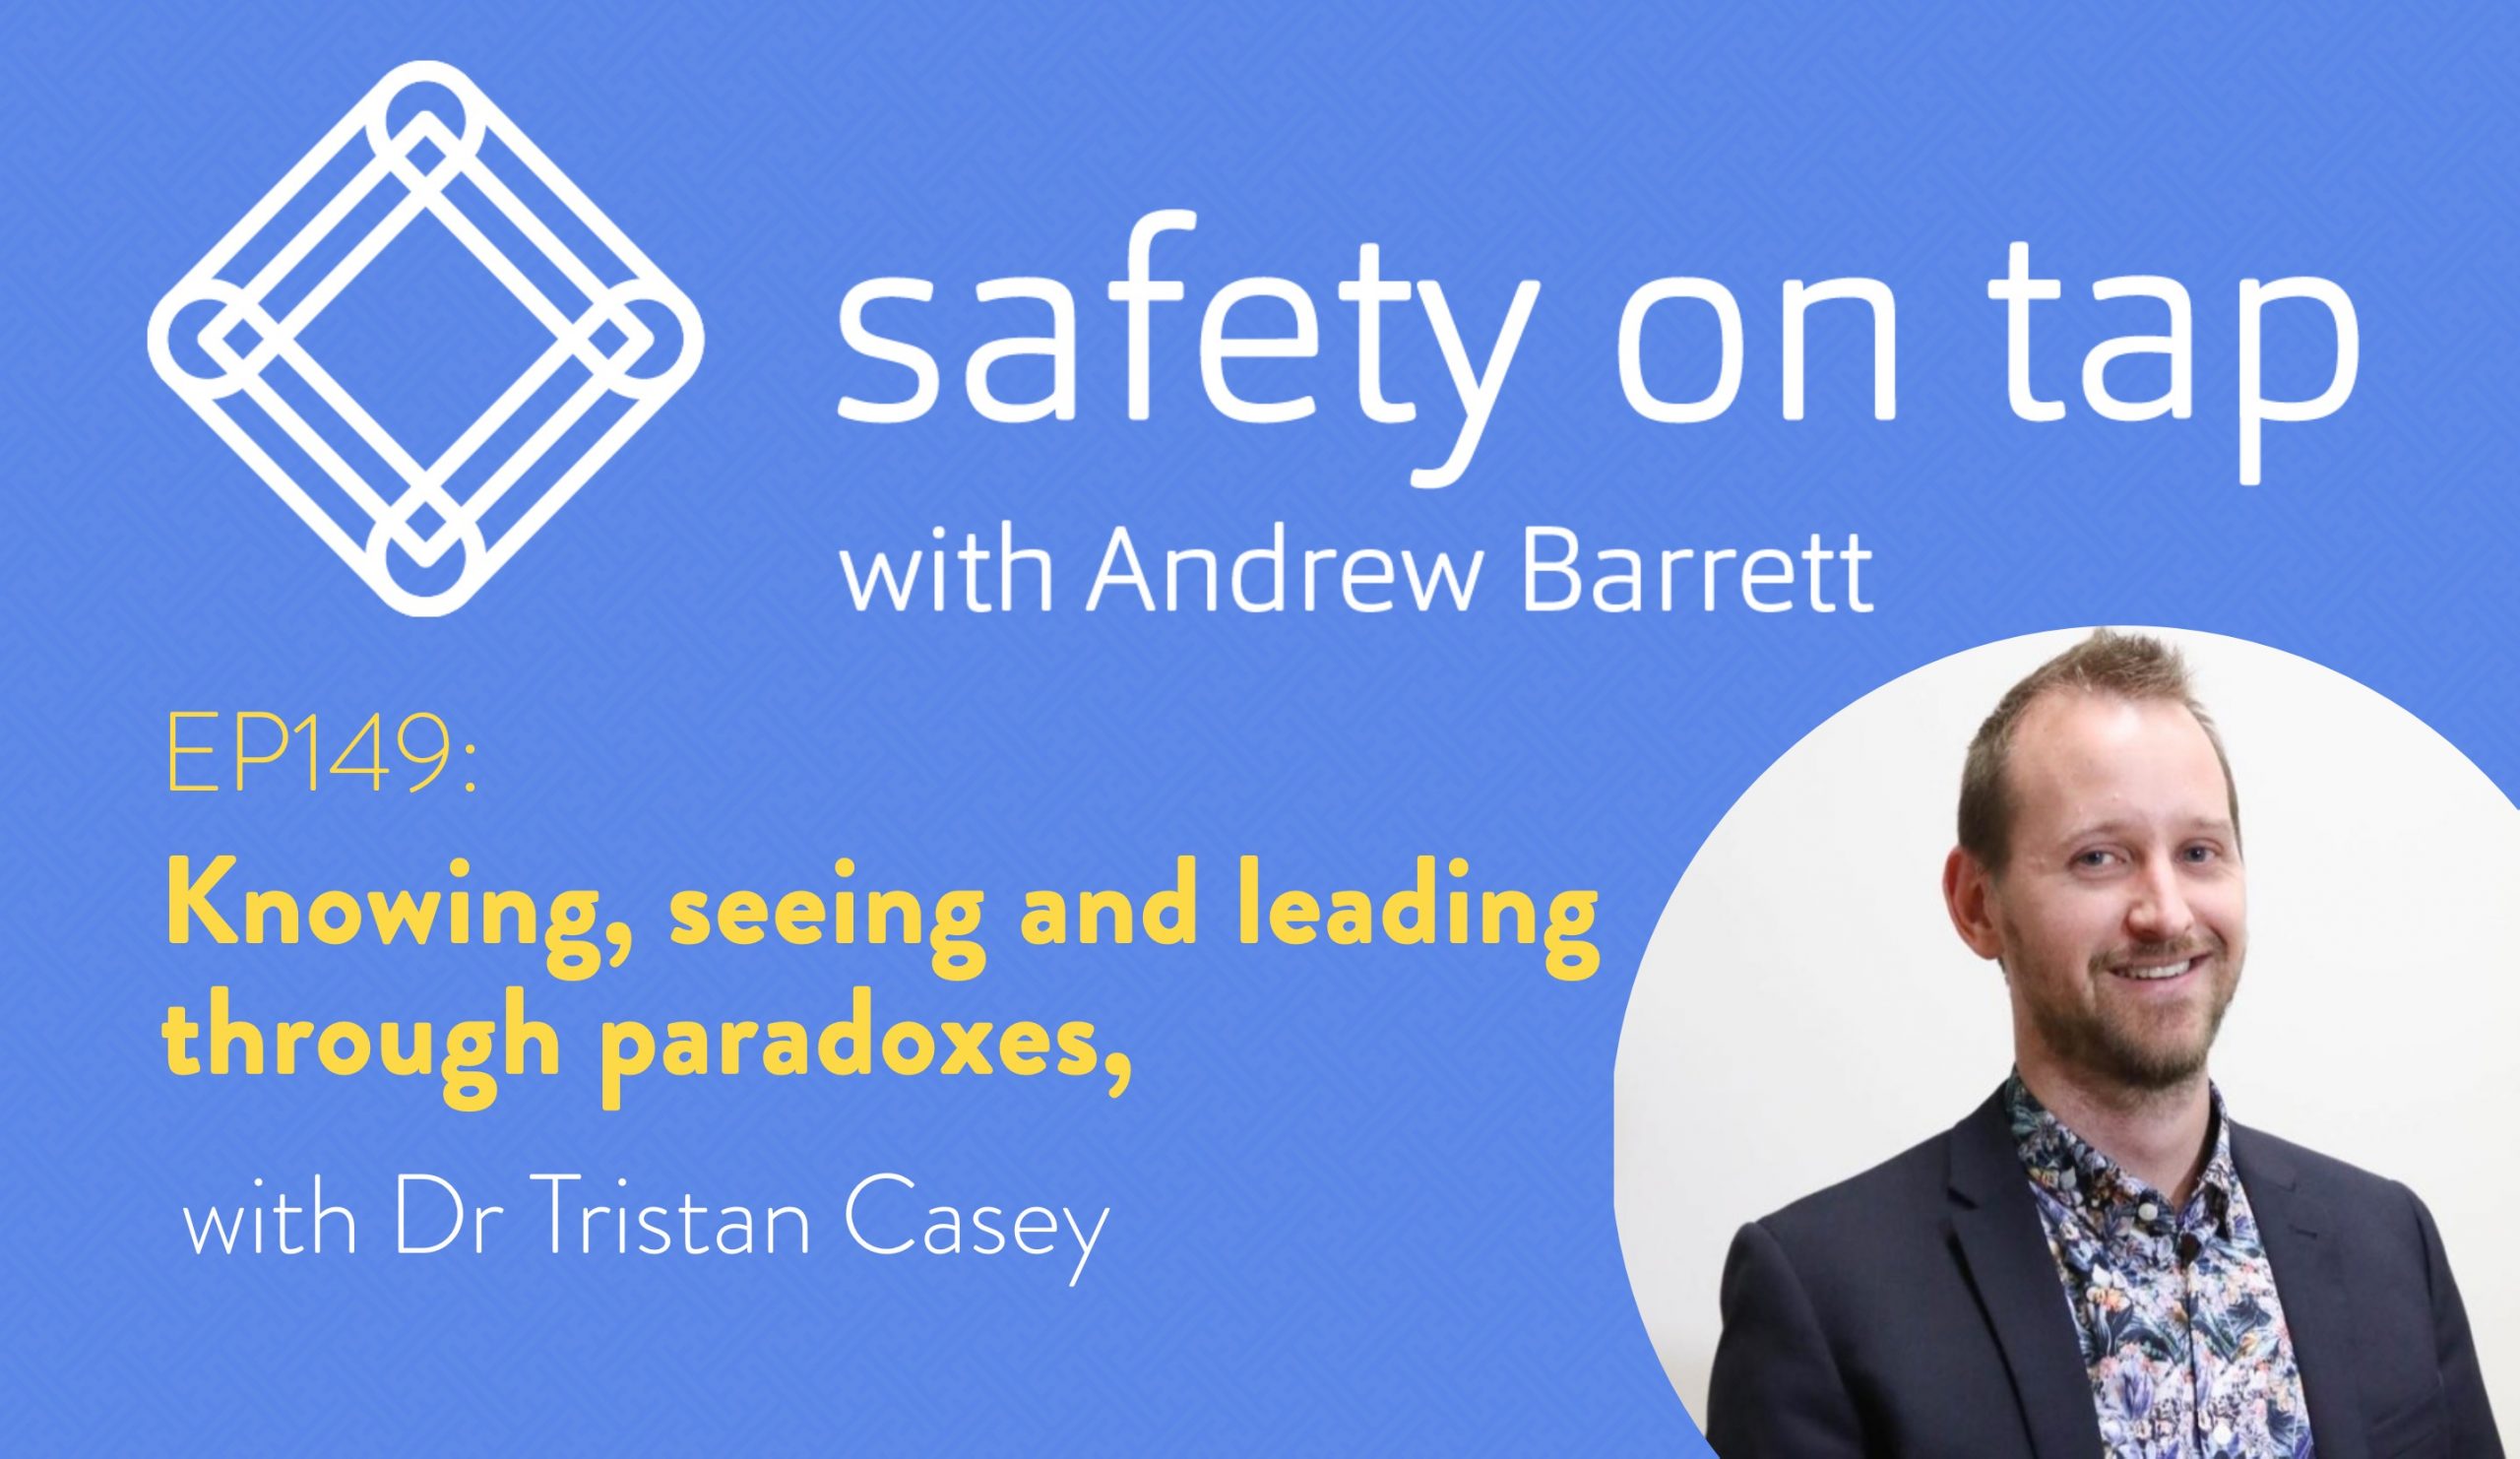 Ep149: Knowing, seeing and leading through paradoxes, with Dr Tristan Casey